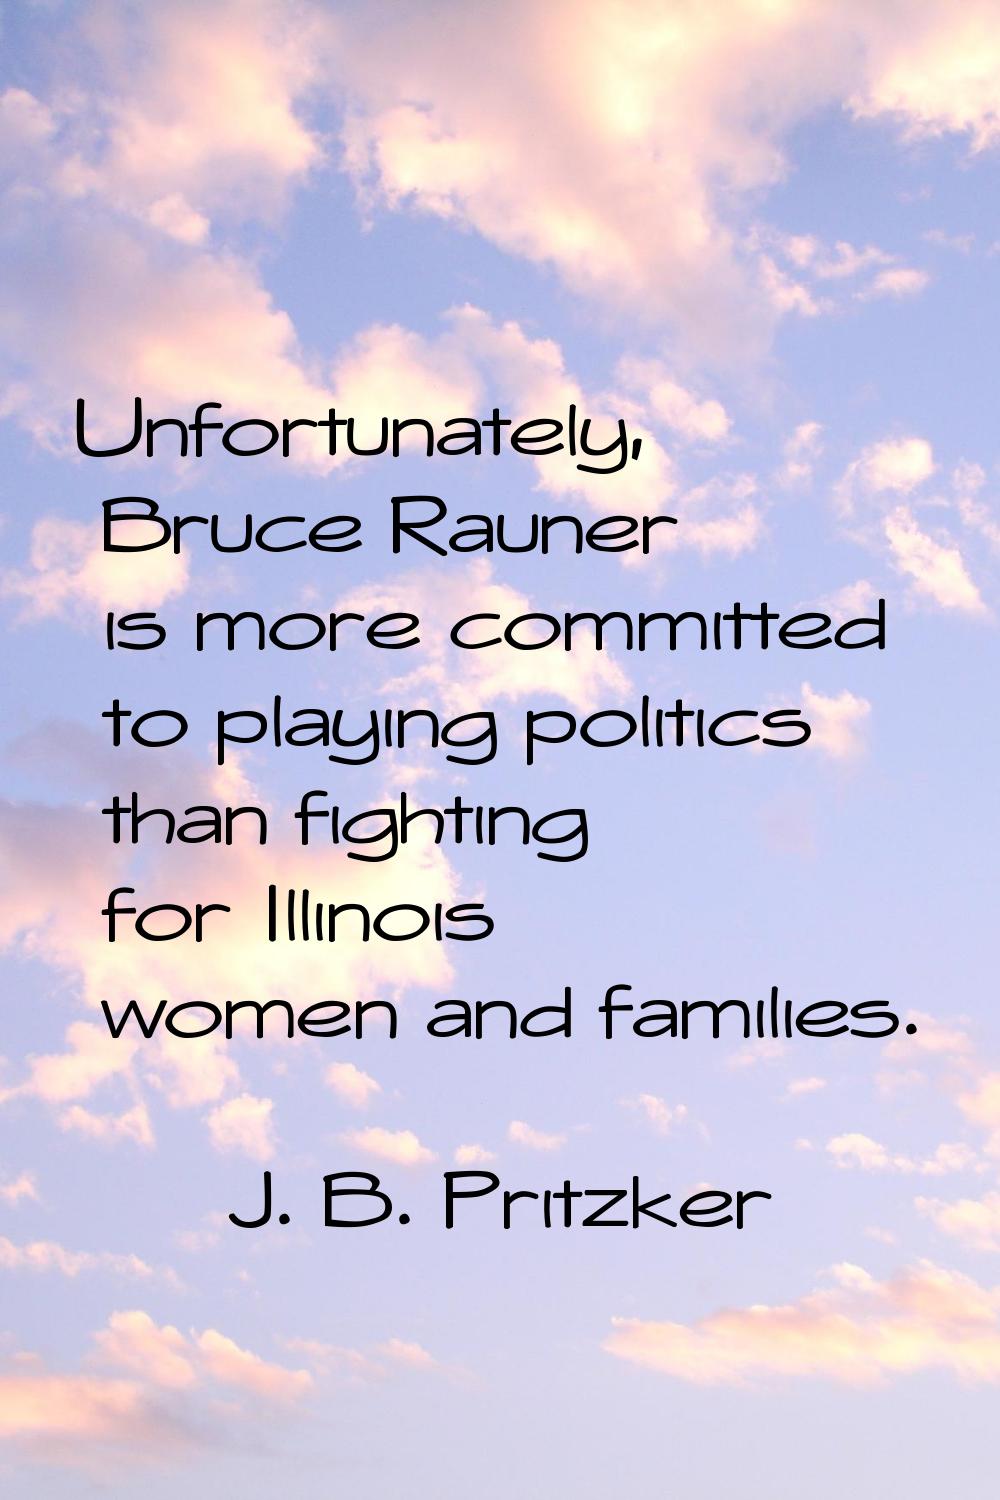 Unfortunately, Bruce Rauner is more committed to playing politics than fighting for Illinois women 